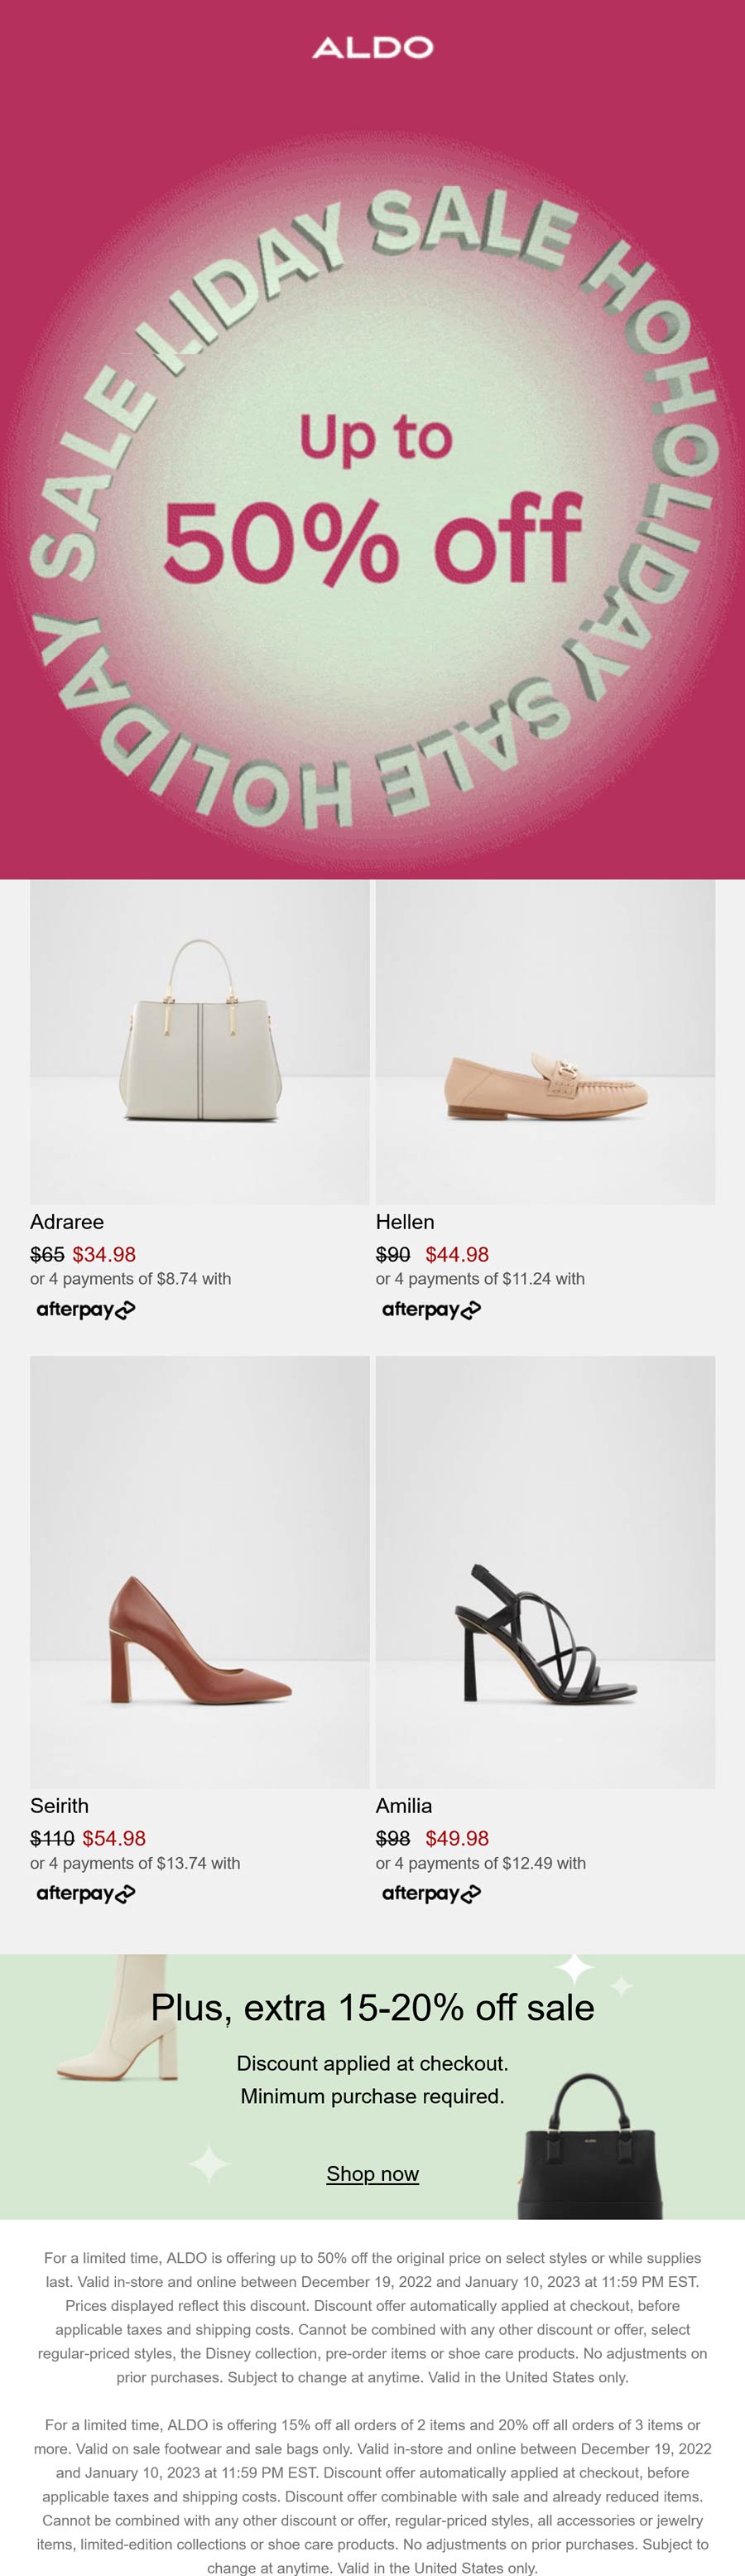 Aldo coupons & promo code for [January 2023]